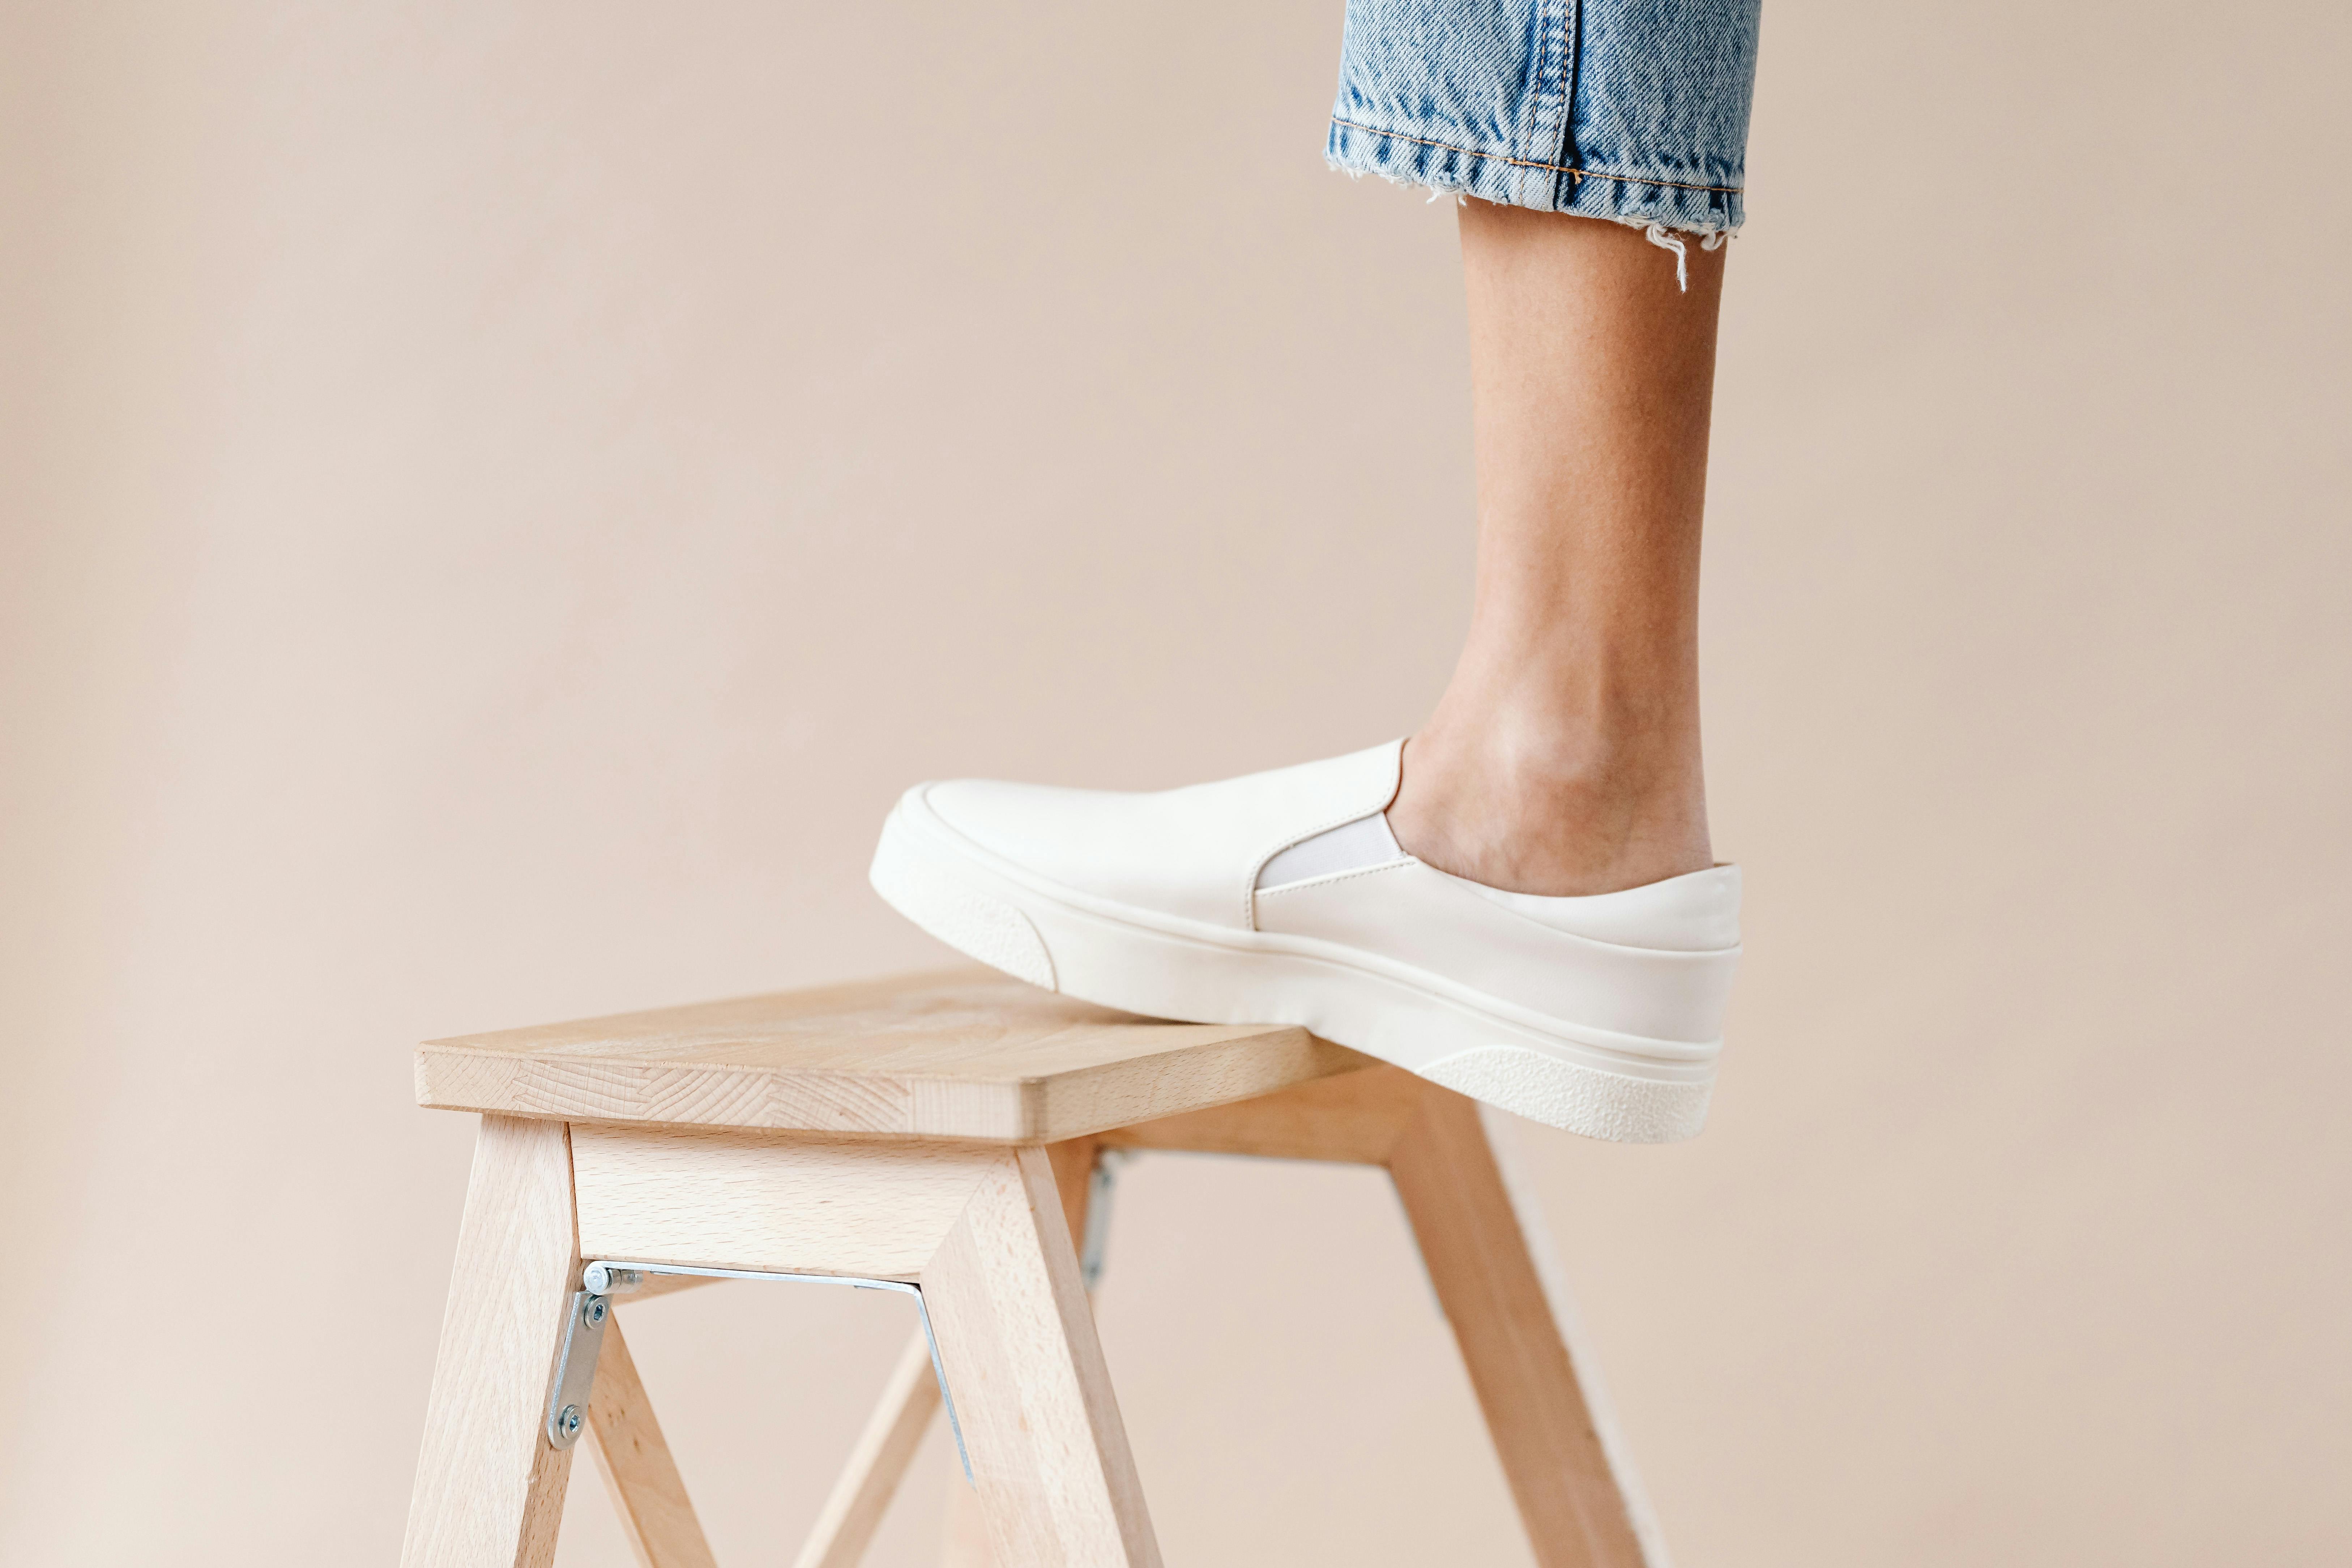 New White Shoes And Care Supplies On Gray Wooden Floor. Brush And Spray To  Keep Footwear Look Good. Stock Photo, Picture and Royalty Free Image. Image  139334039.